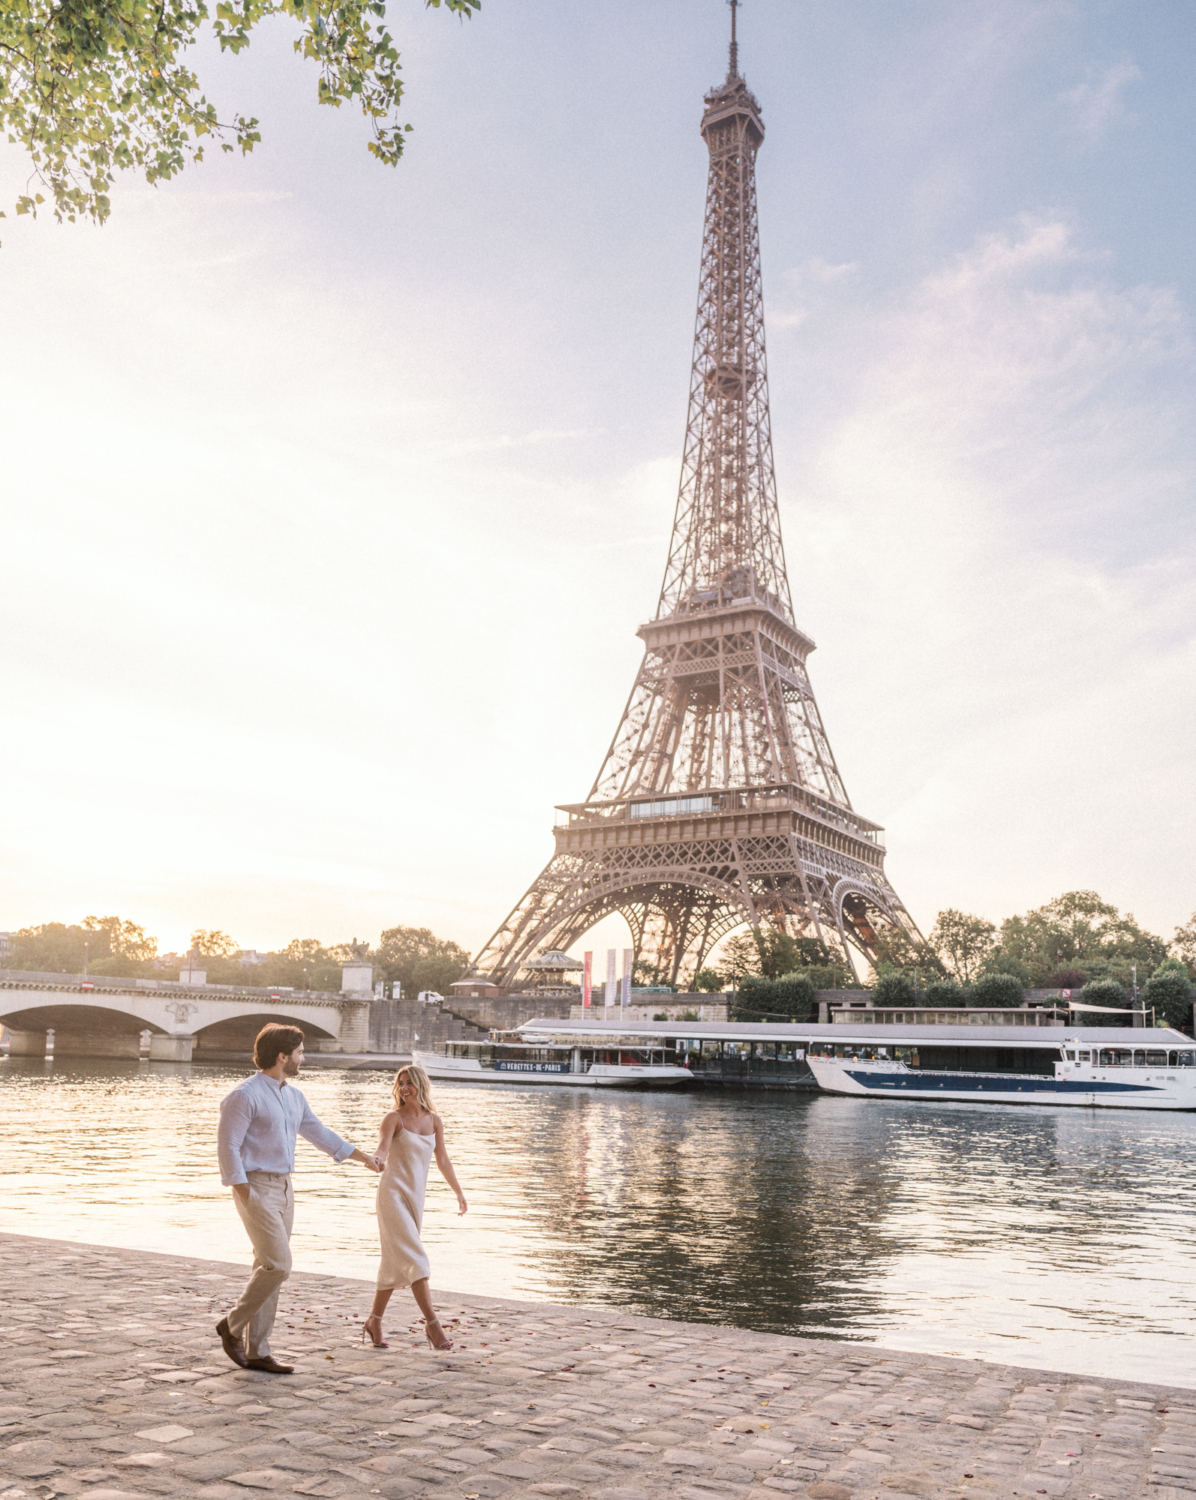 engaged young couple walk holding hands at the eiffel tower in paris